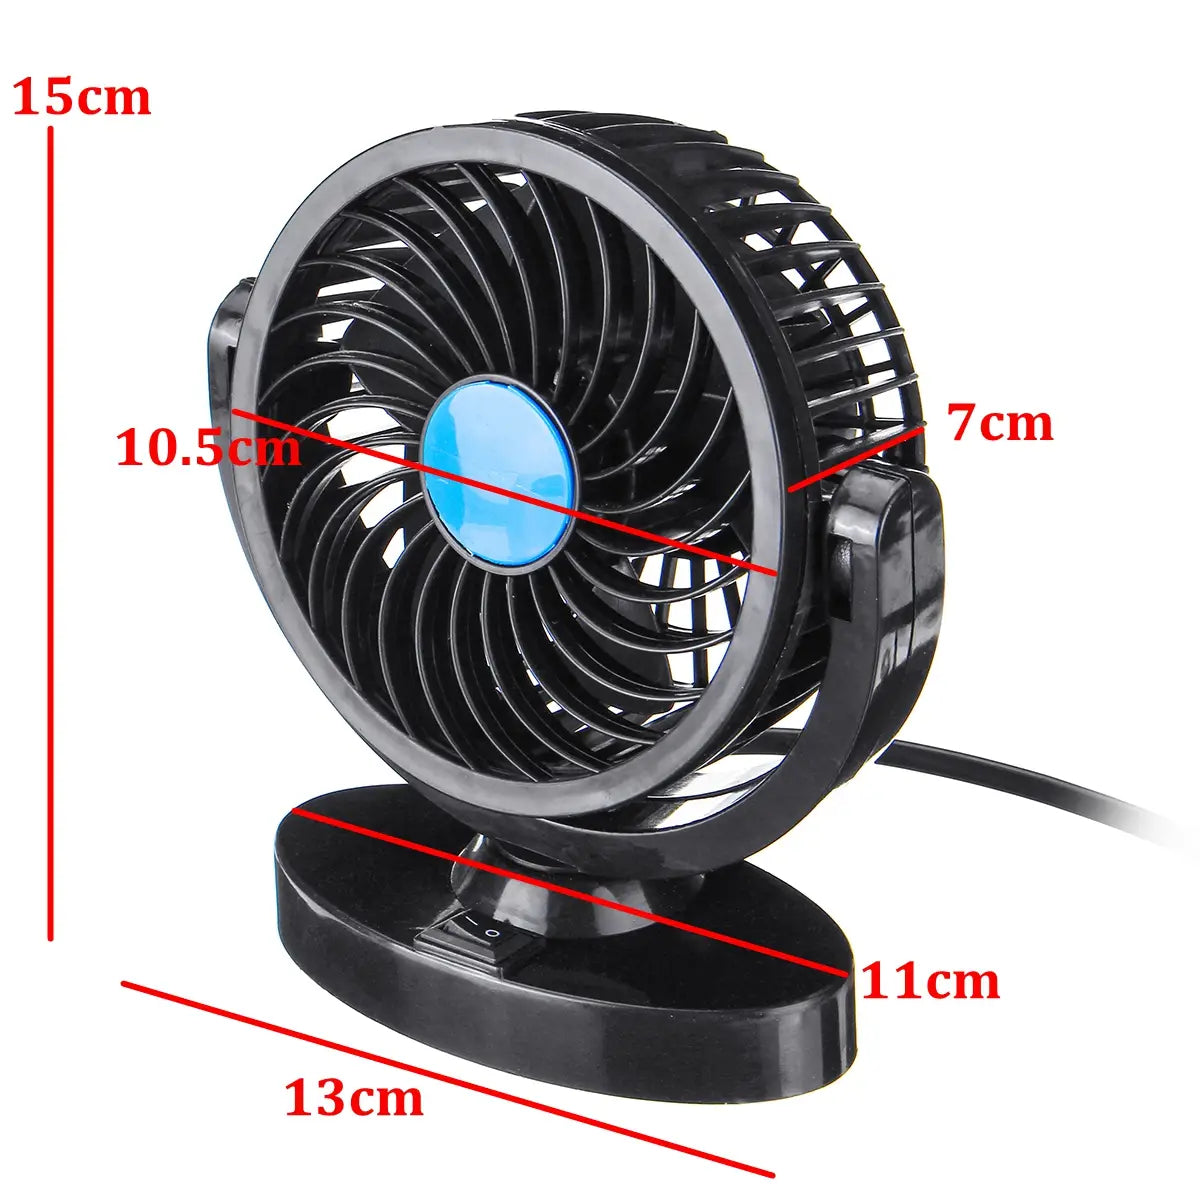 Dc 12v/24v 360 All-round Mini Auto Air Cooling Fan